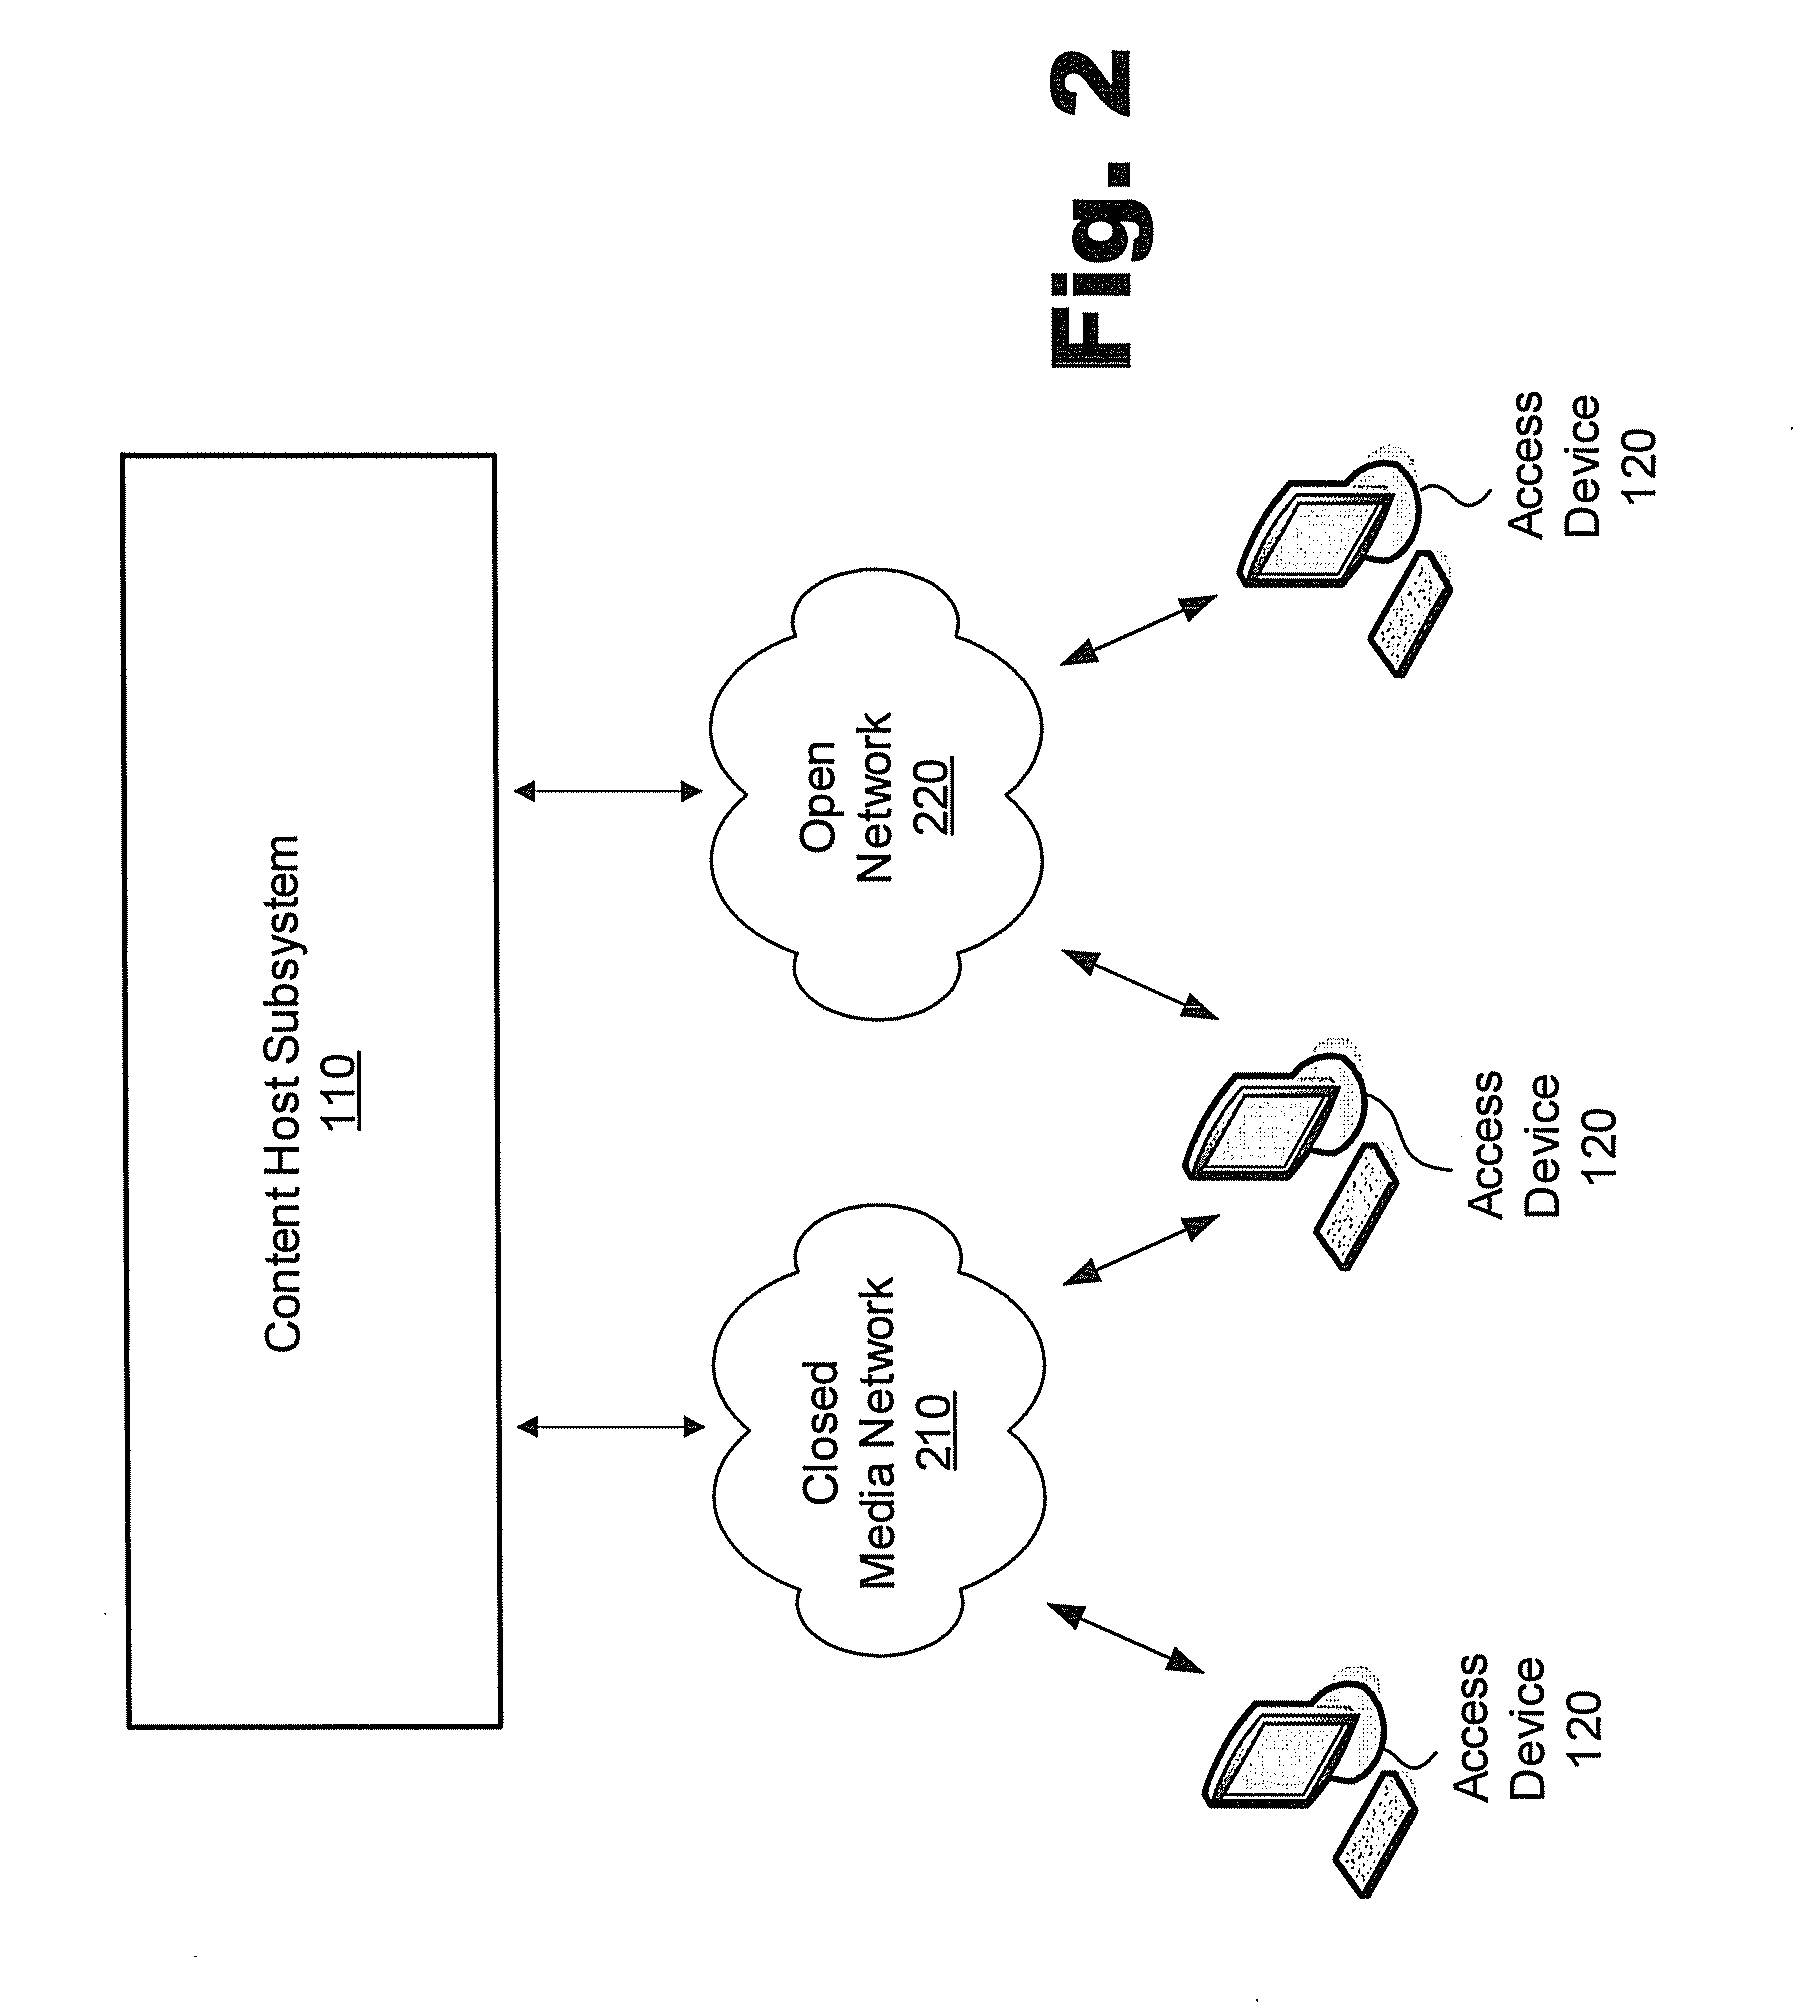 Content hosting and advertising systems and methods